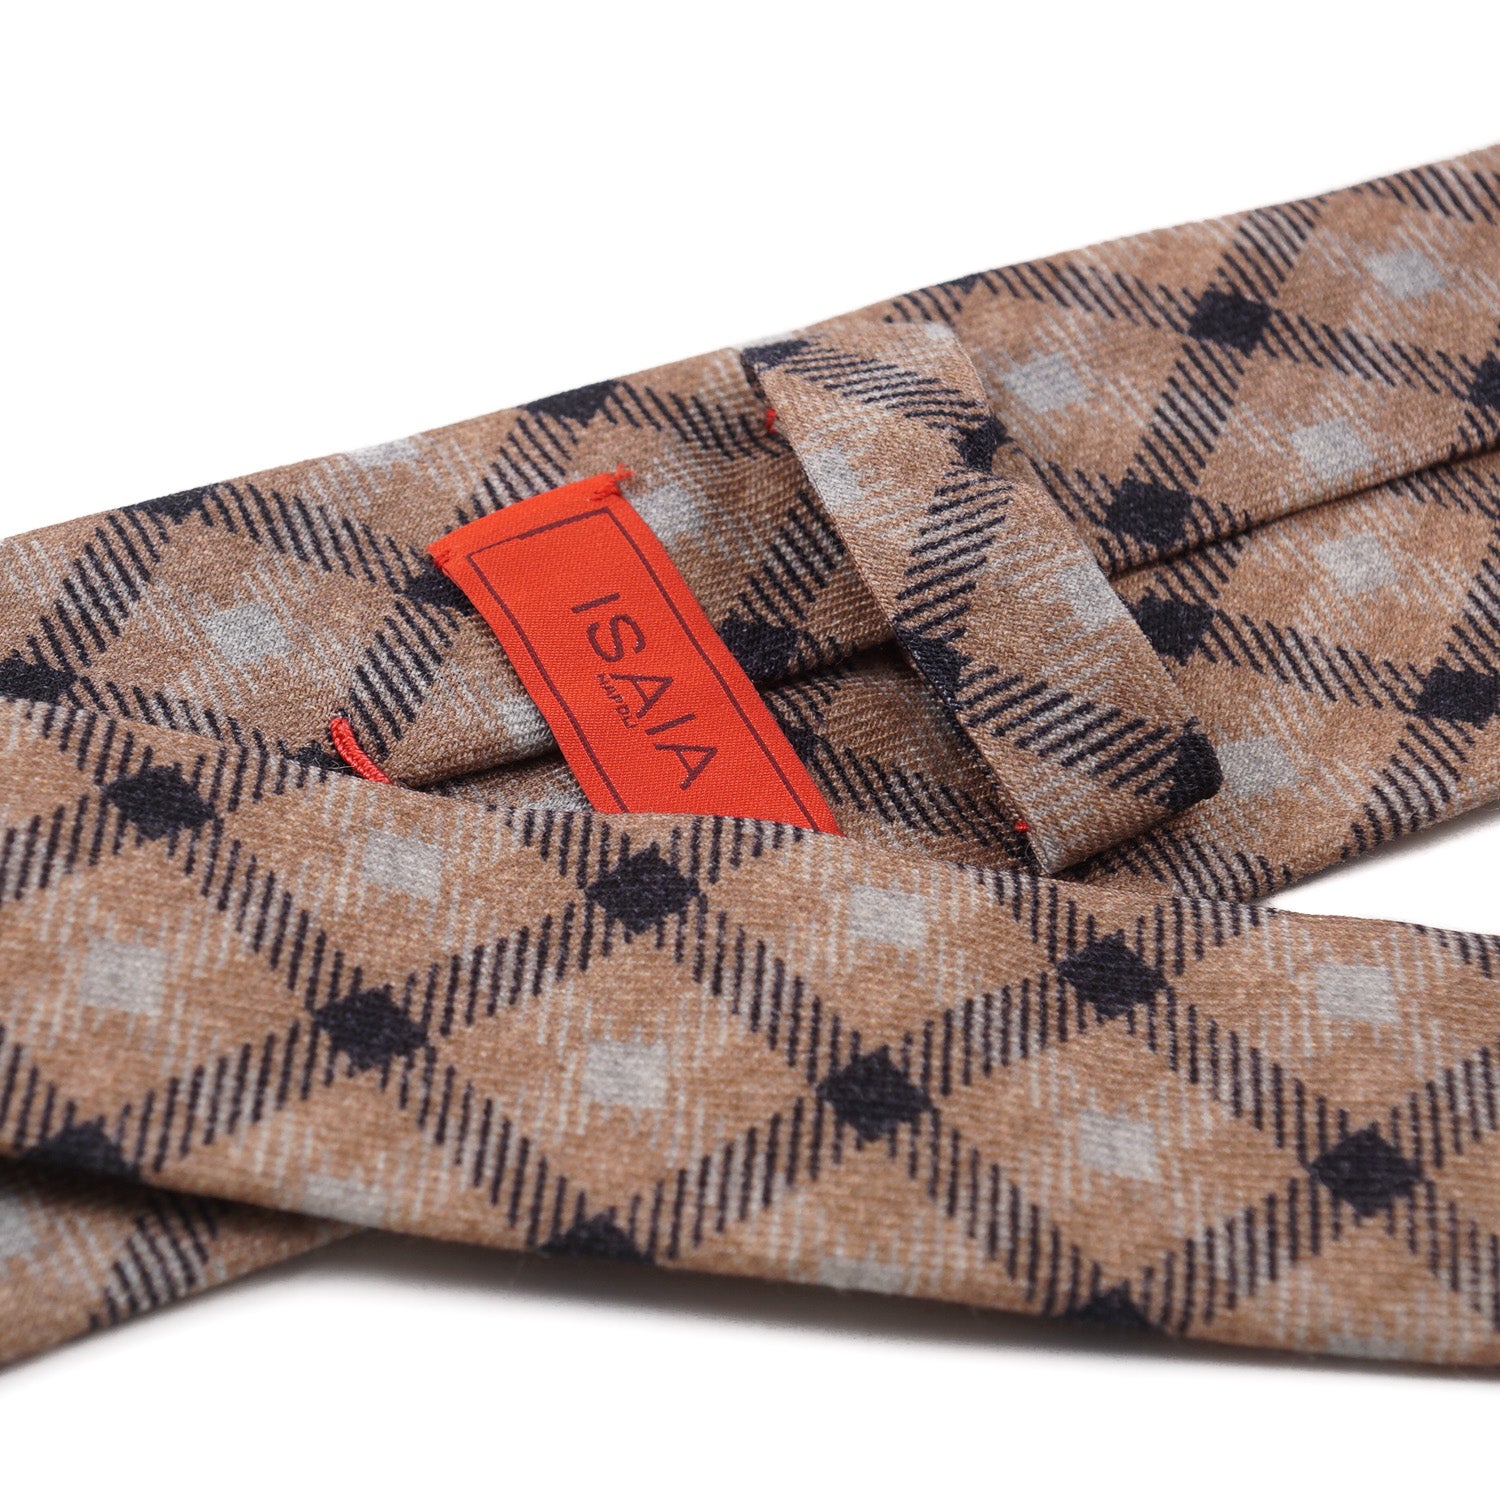 Isaia Soft Wool Tie with Check Print - Top Shelf Apparel